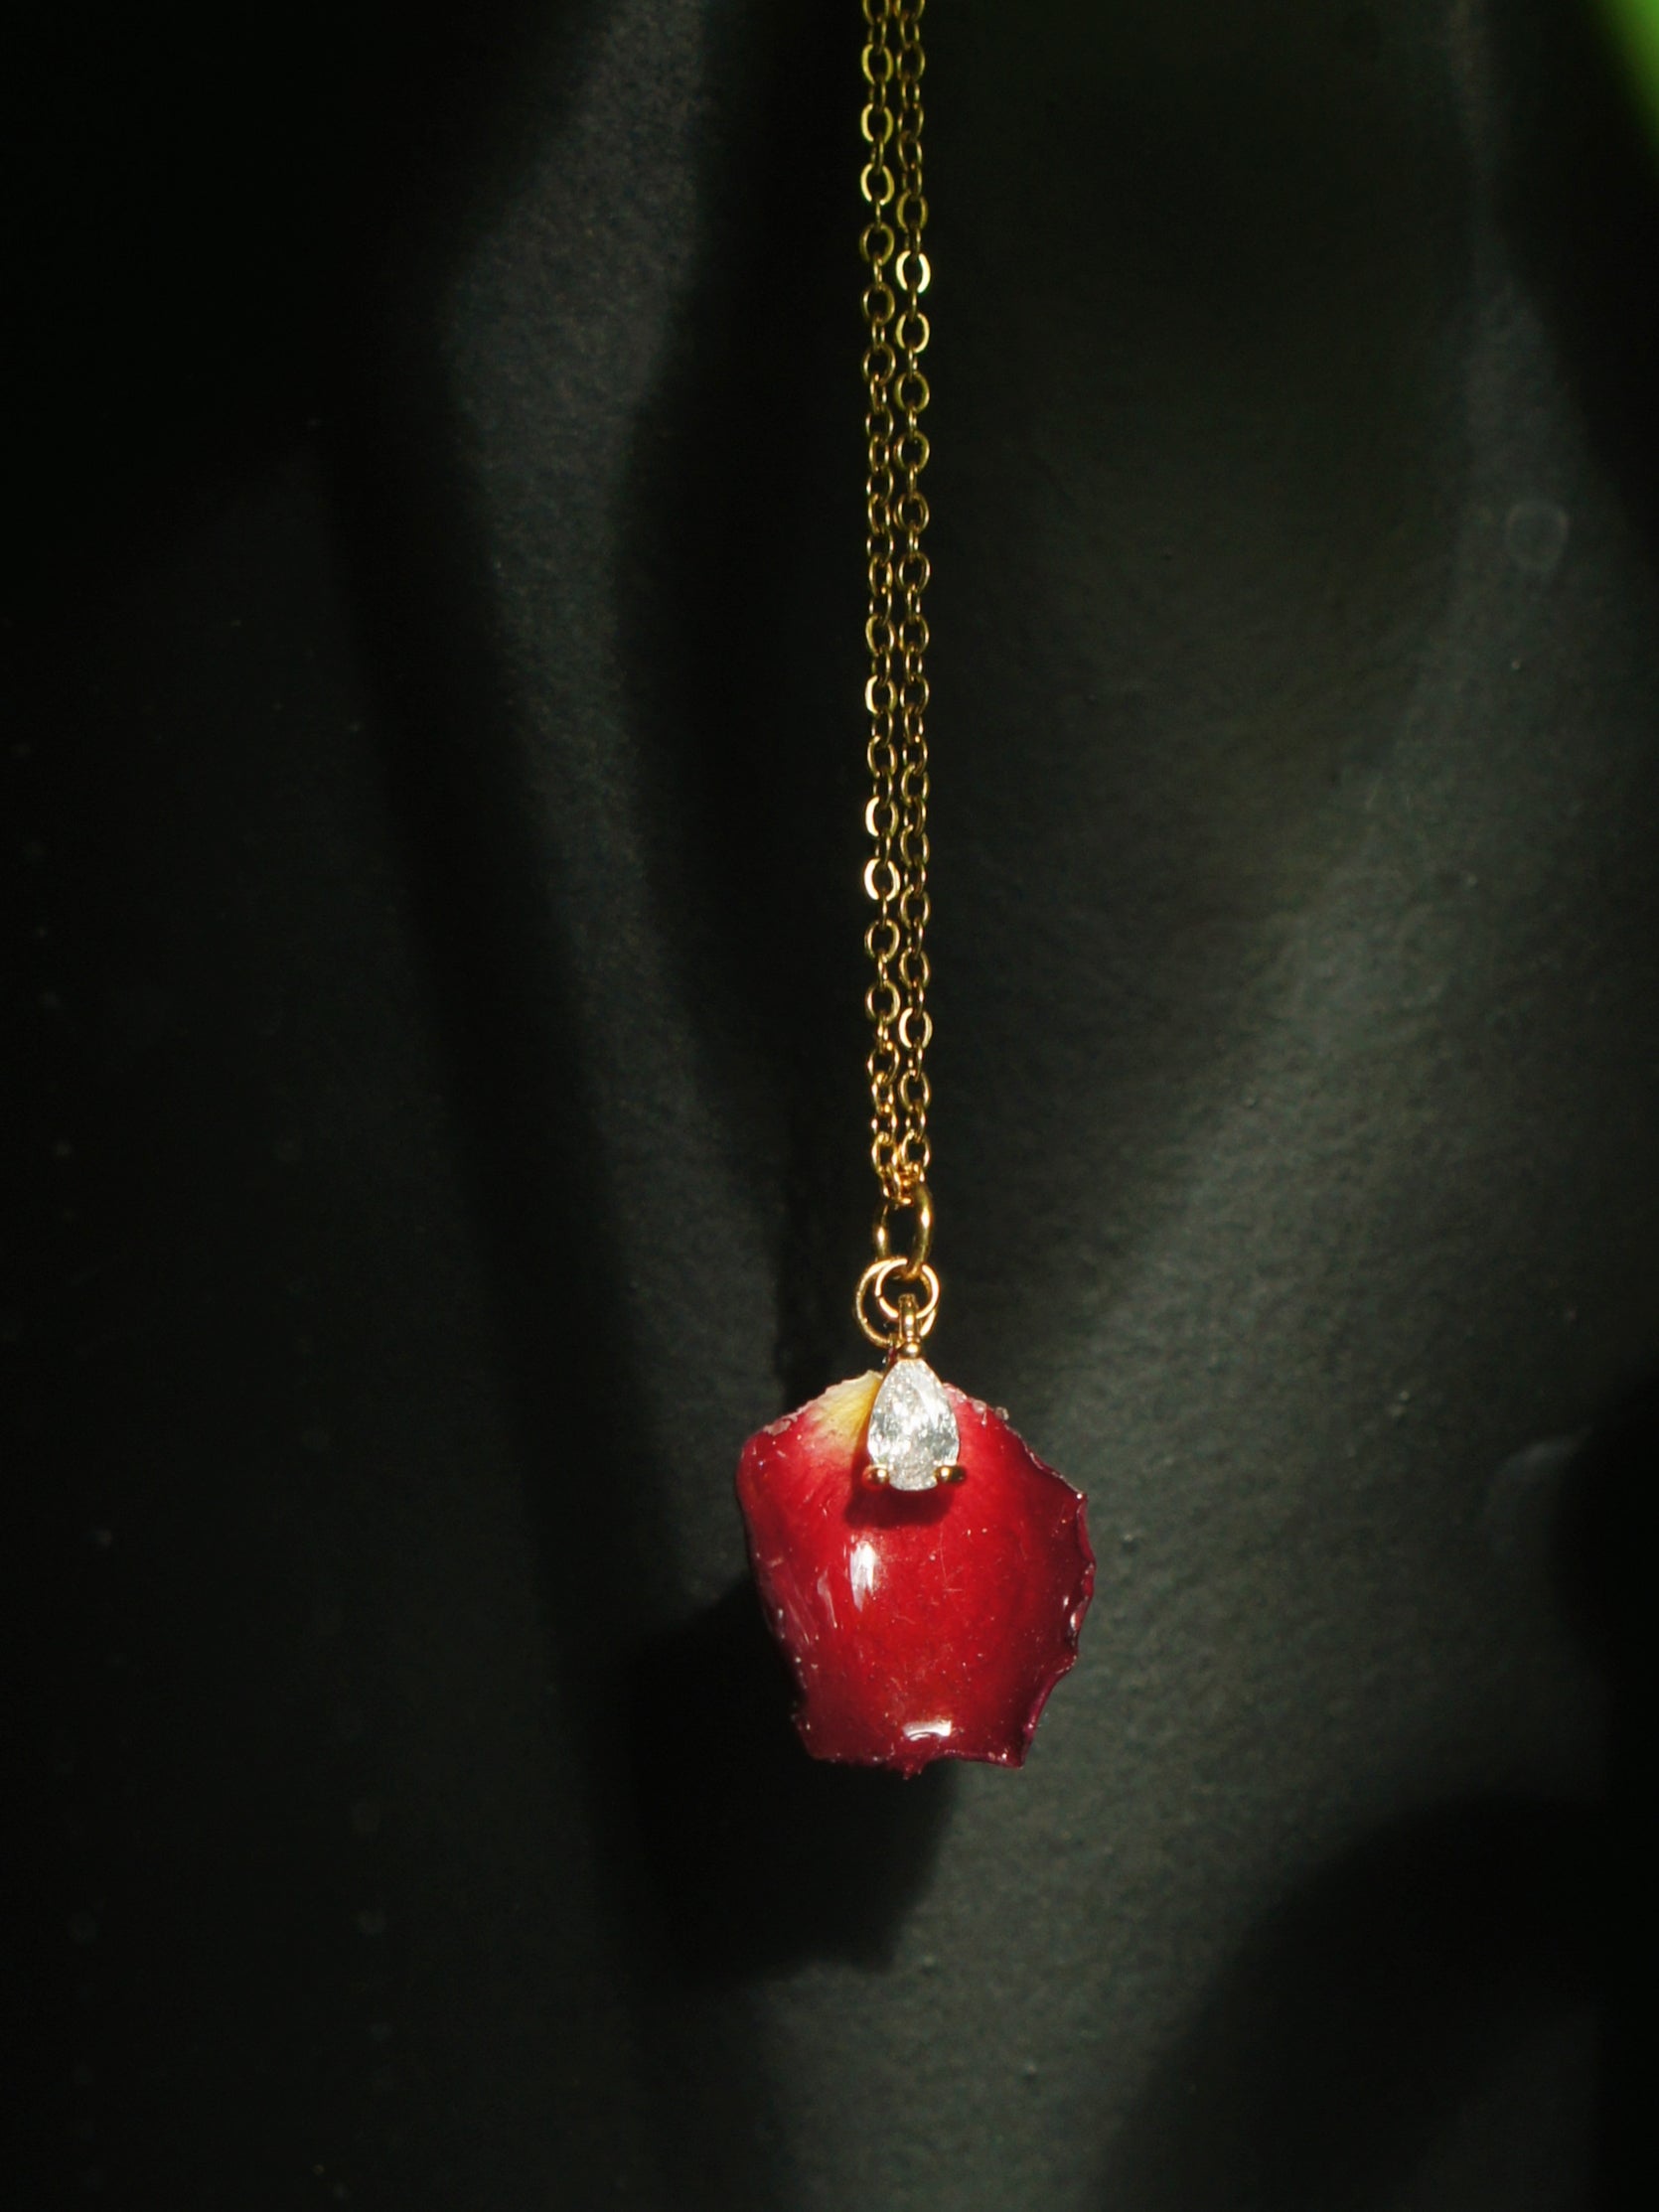 *REAL FLOWER* Grande Amore Rose Petal and Crystal Pendant Necklace